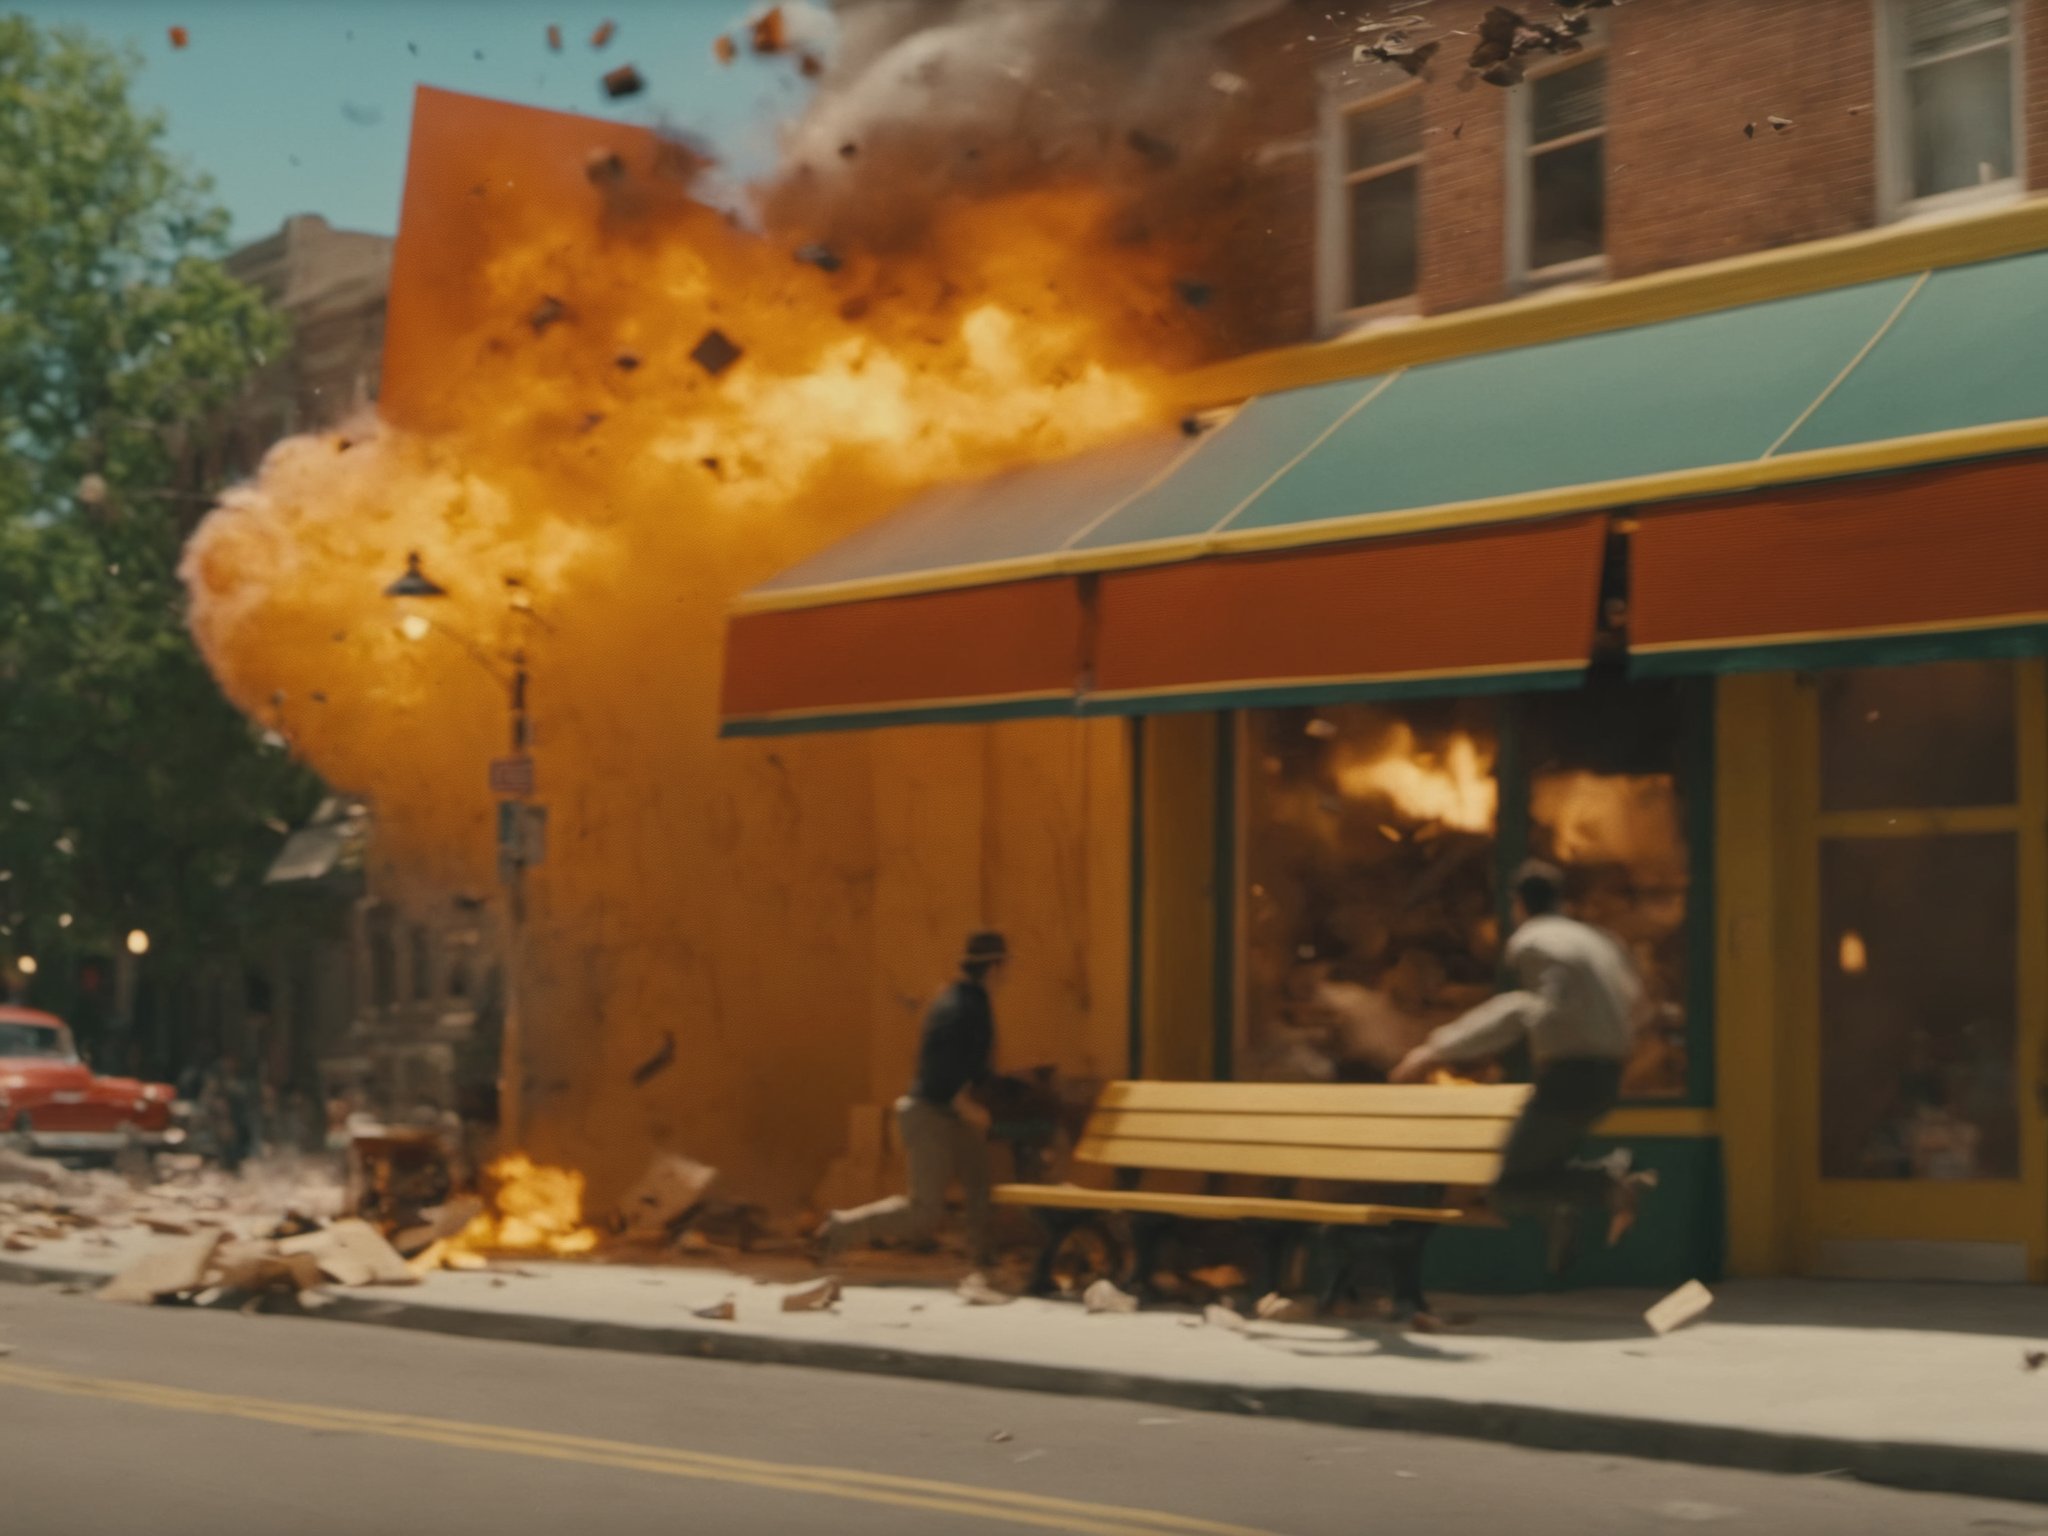 (m0vieexpl0sion), film still of a storefront, (small explosion:0.7), trees, benches, street, flying debris, people, best picture, best quality, UHD, oscar winner